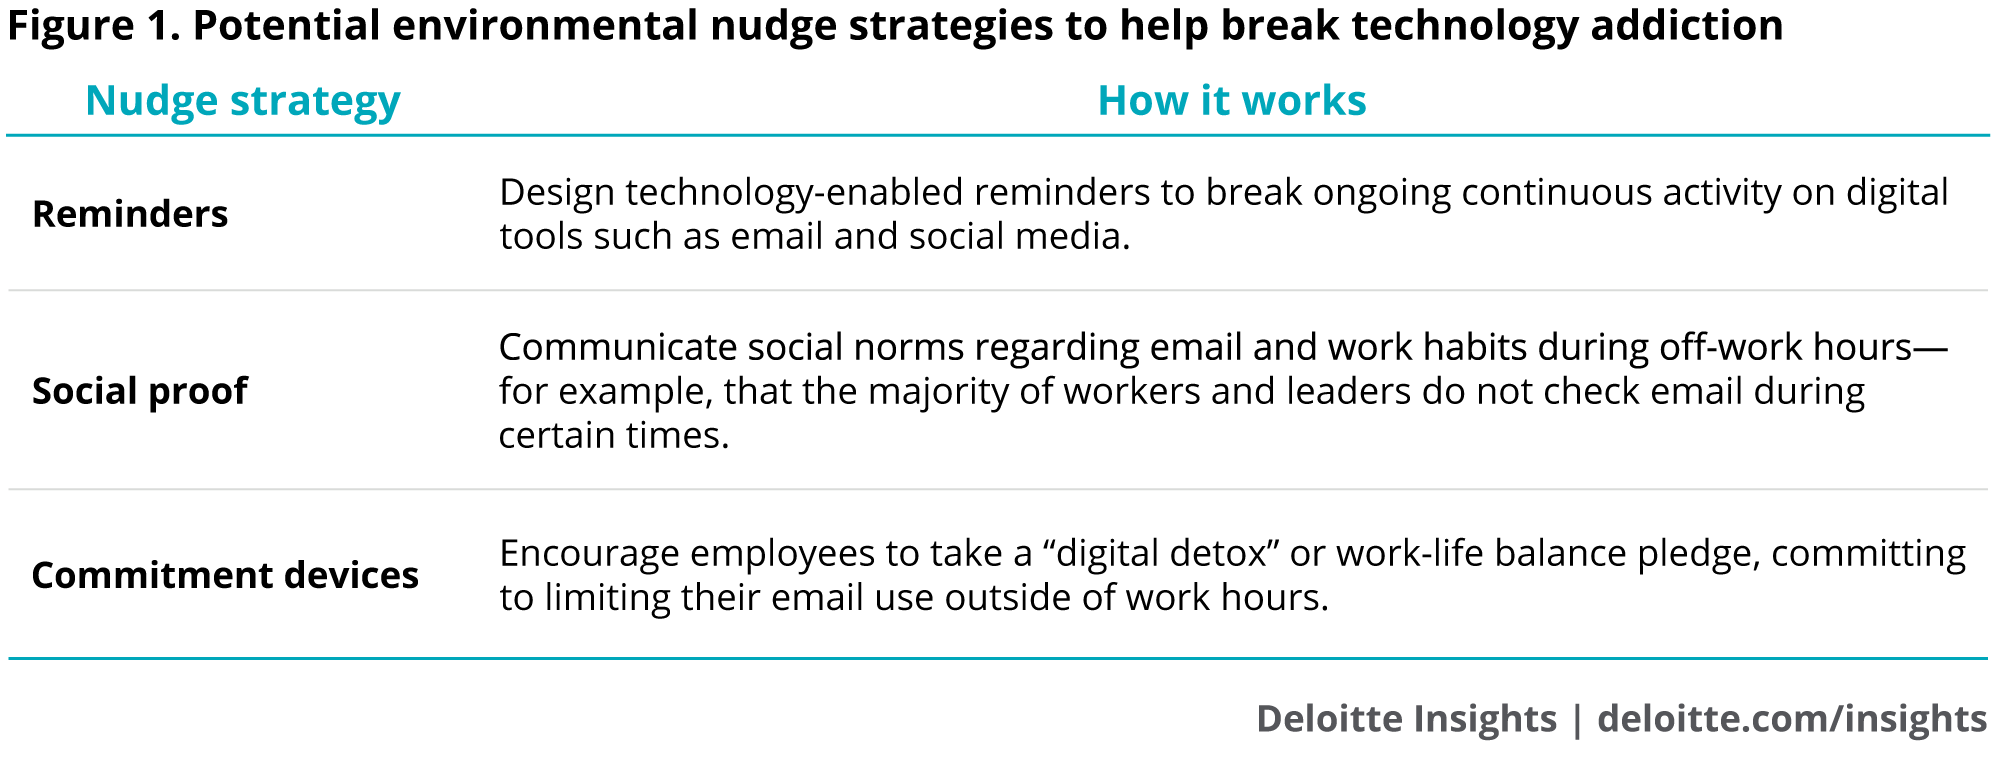 Potential environmental nudge strategies to help break technology addiction